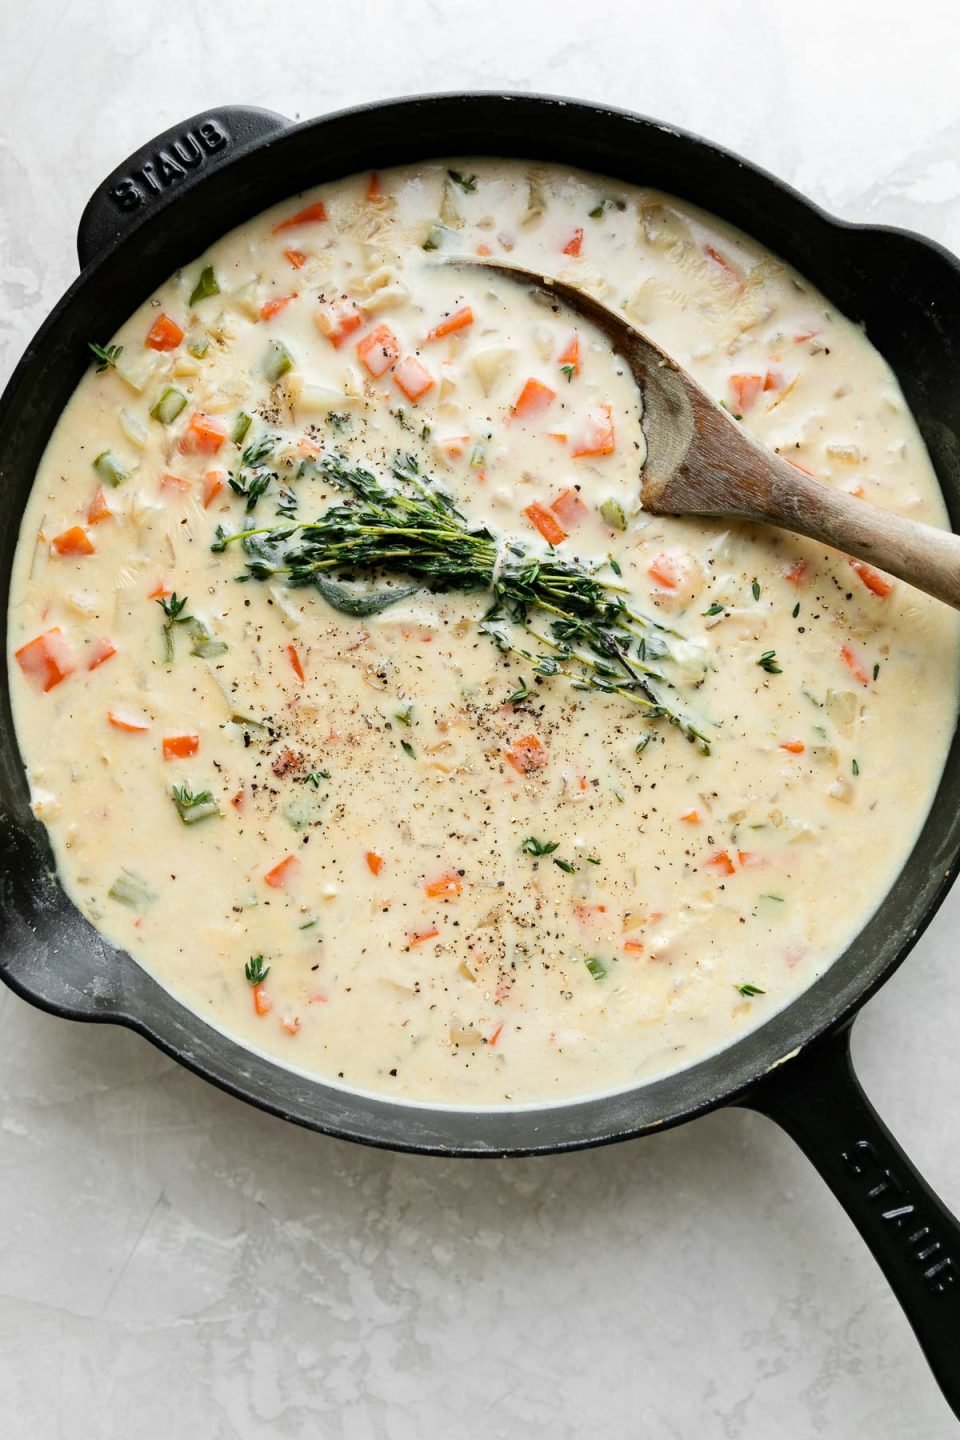 A black Staub cast iron skillet is filled with sauce to make Skillet Chicken Pot Pie. Fresh rosemary, thyme, and sage tied together with kitchen twine has been added to the sauce and it has also been seasoned with kosher salt and ground black pepper. The skillet sits atop a creamy white textured surface and a wooden spoon rests inside the skillet.